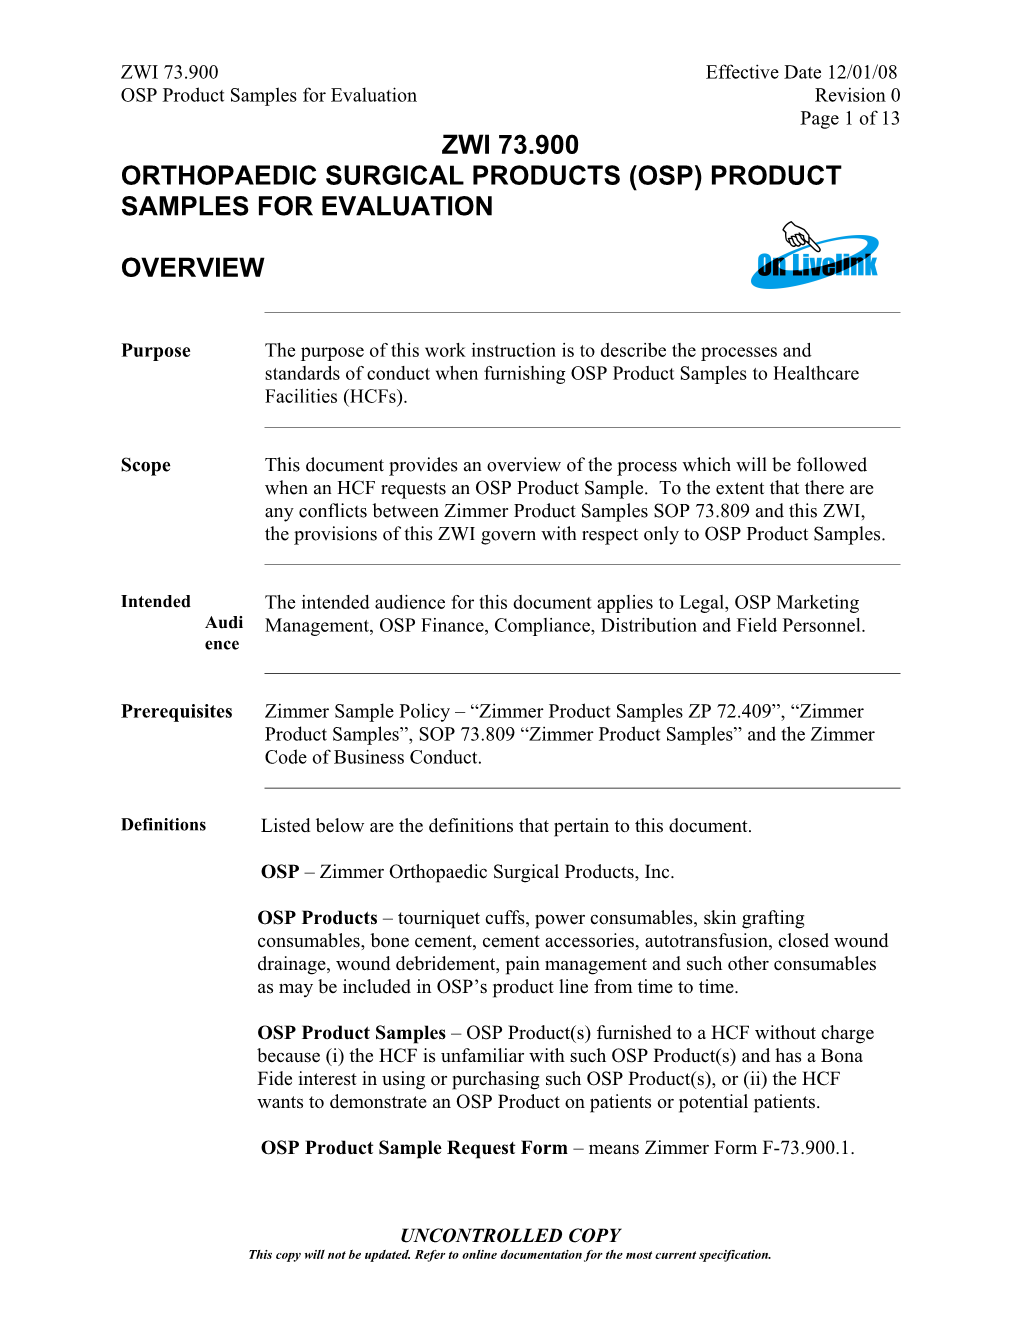 OSP Product Samples for Evaluationrevision 0